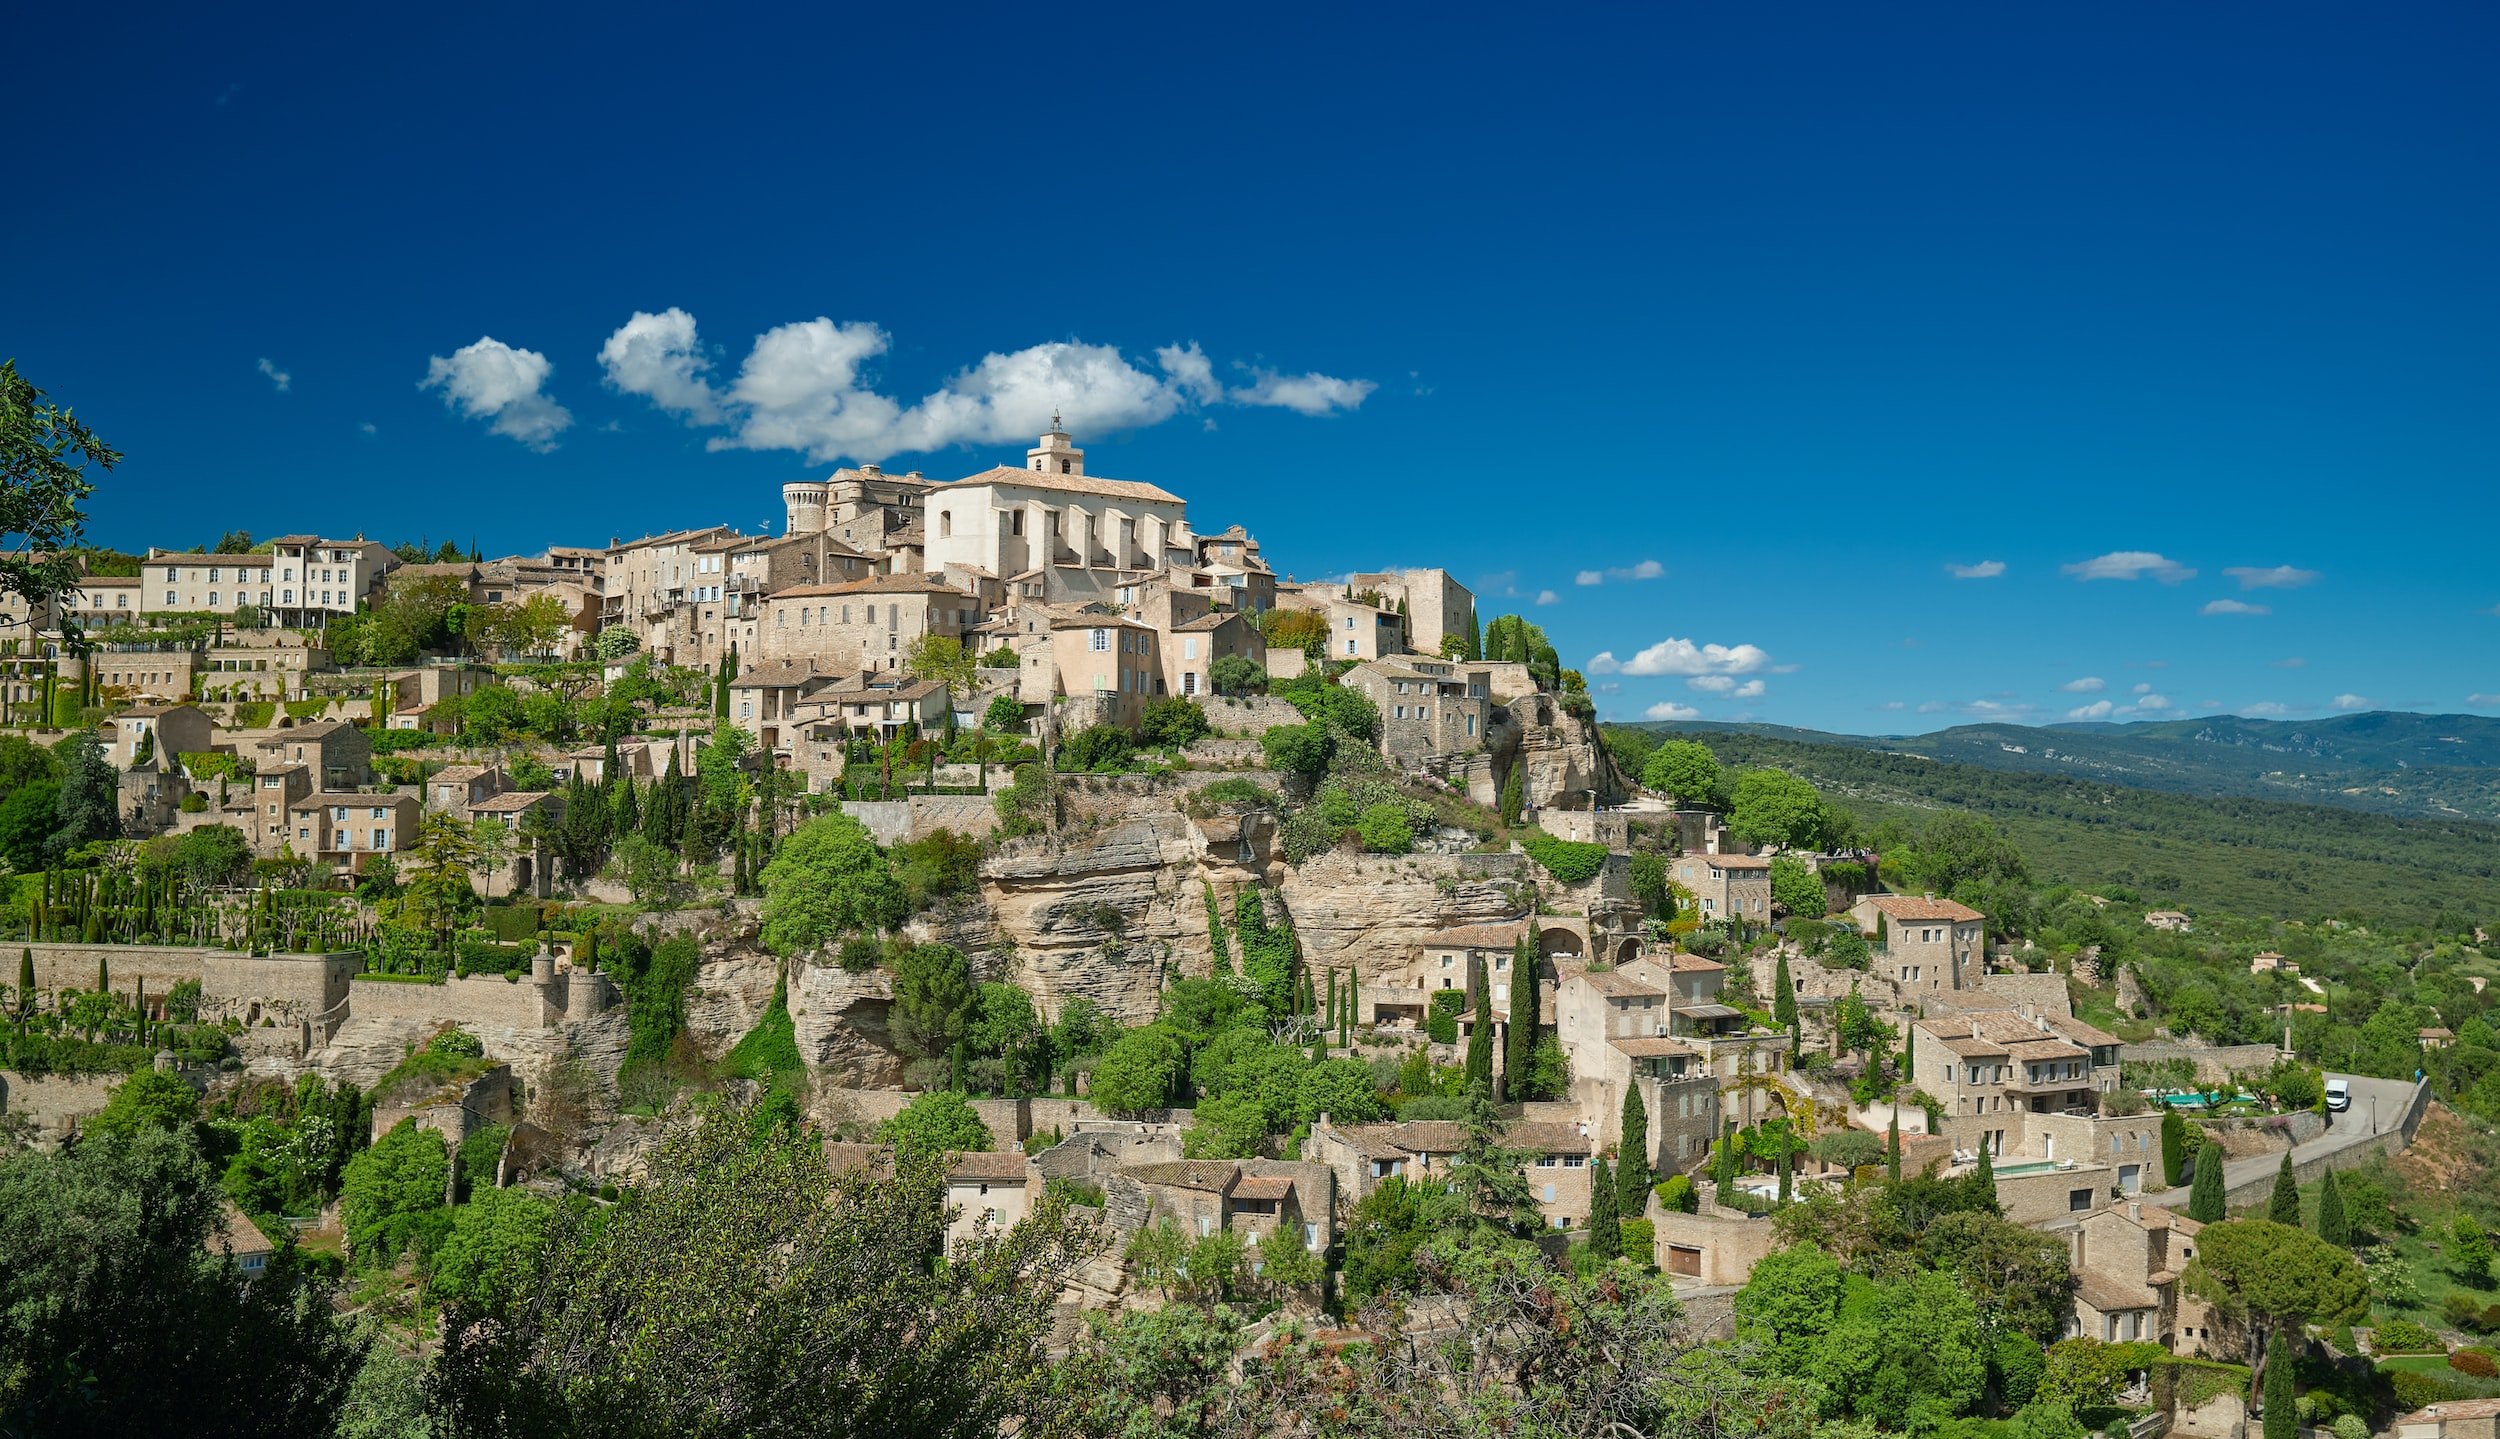 Exceptional estate and guided tour of the magnificent Luberon villages